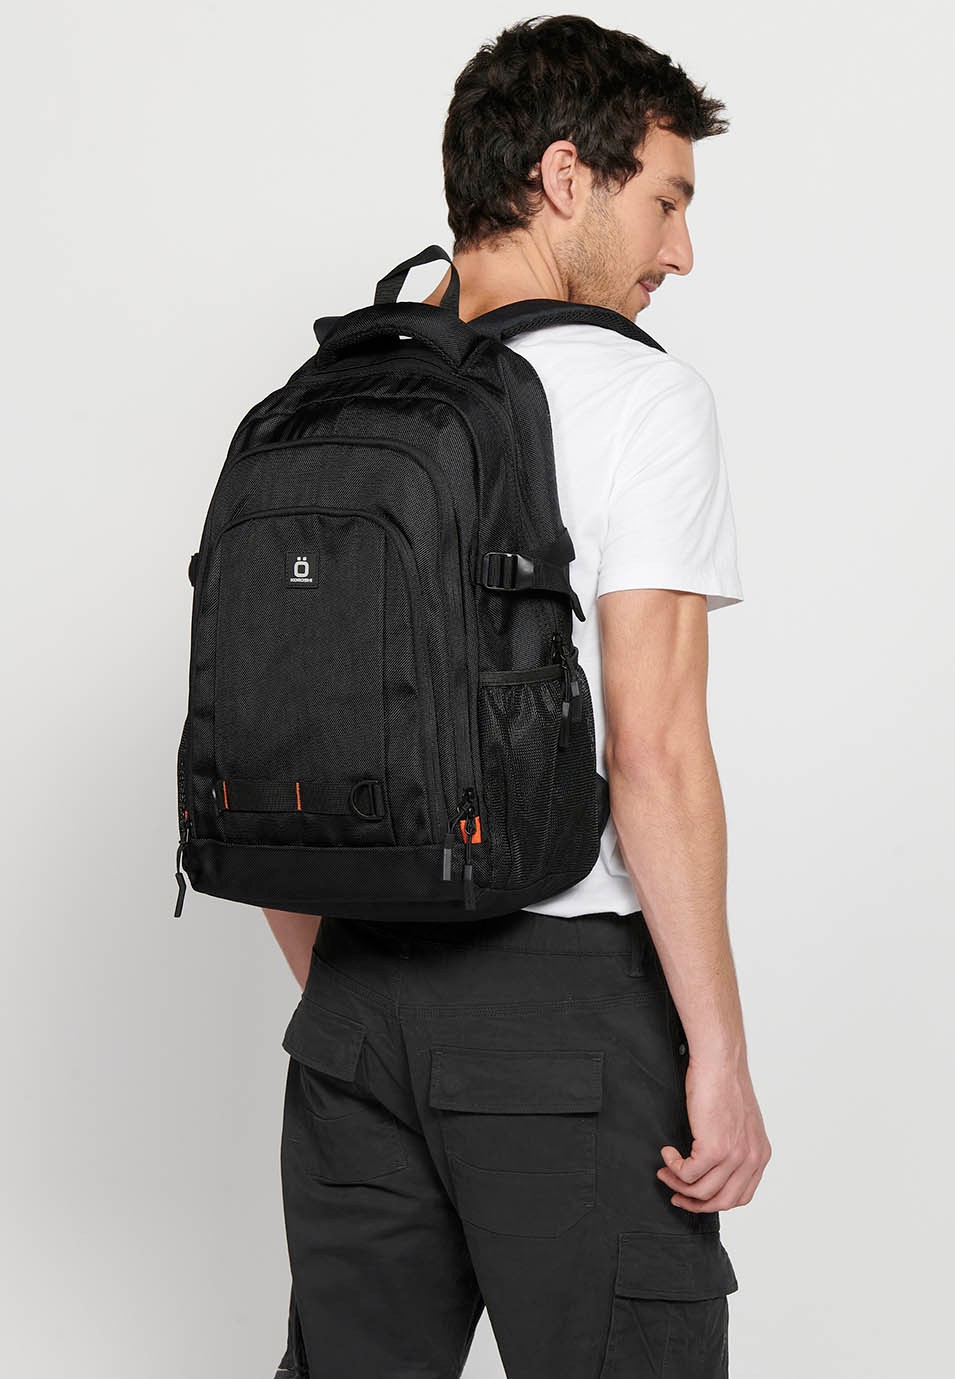 Koröshi backpack with three zippered compartments, one for a laptop, with black interior pockets 8